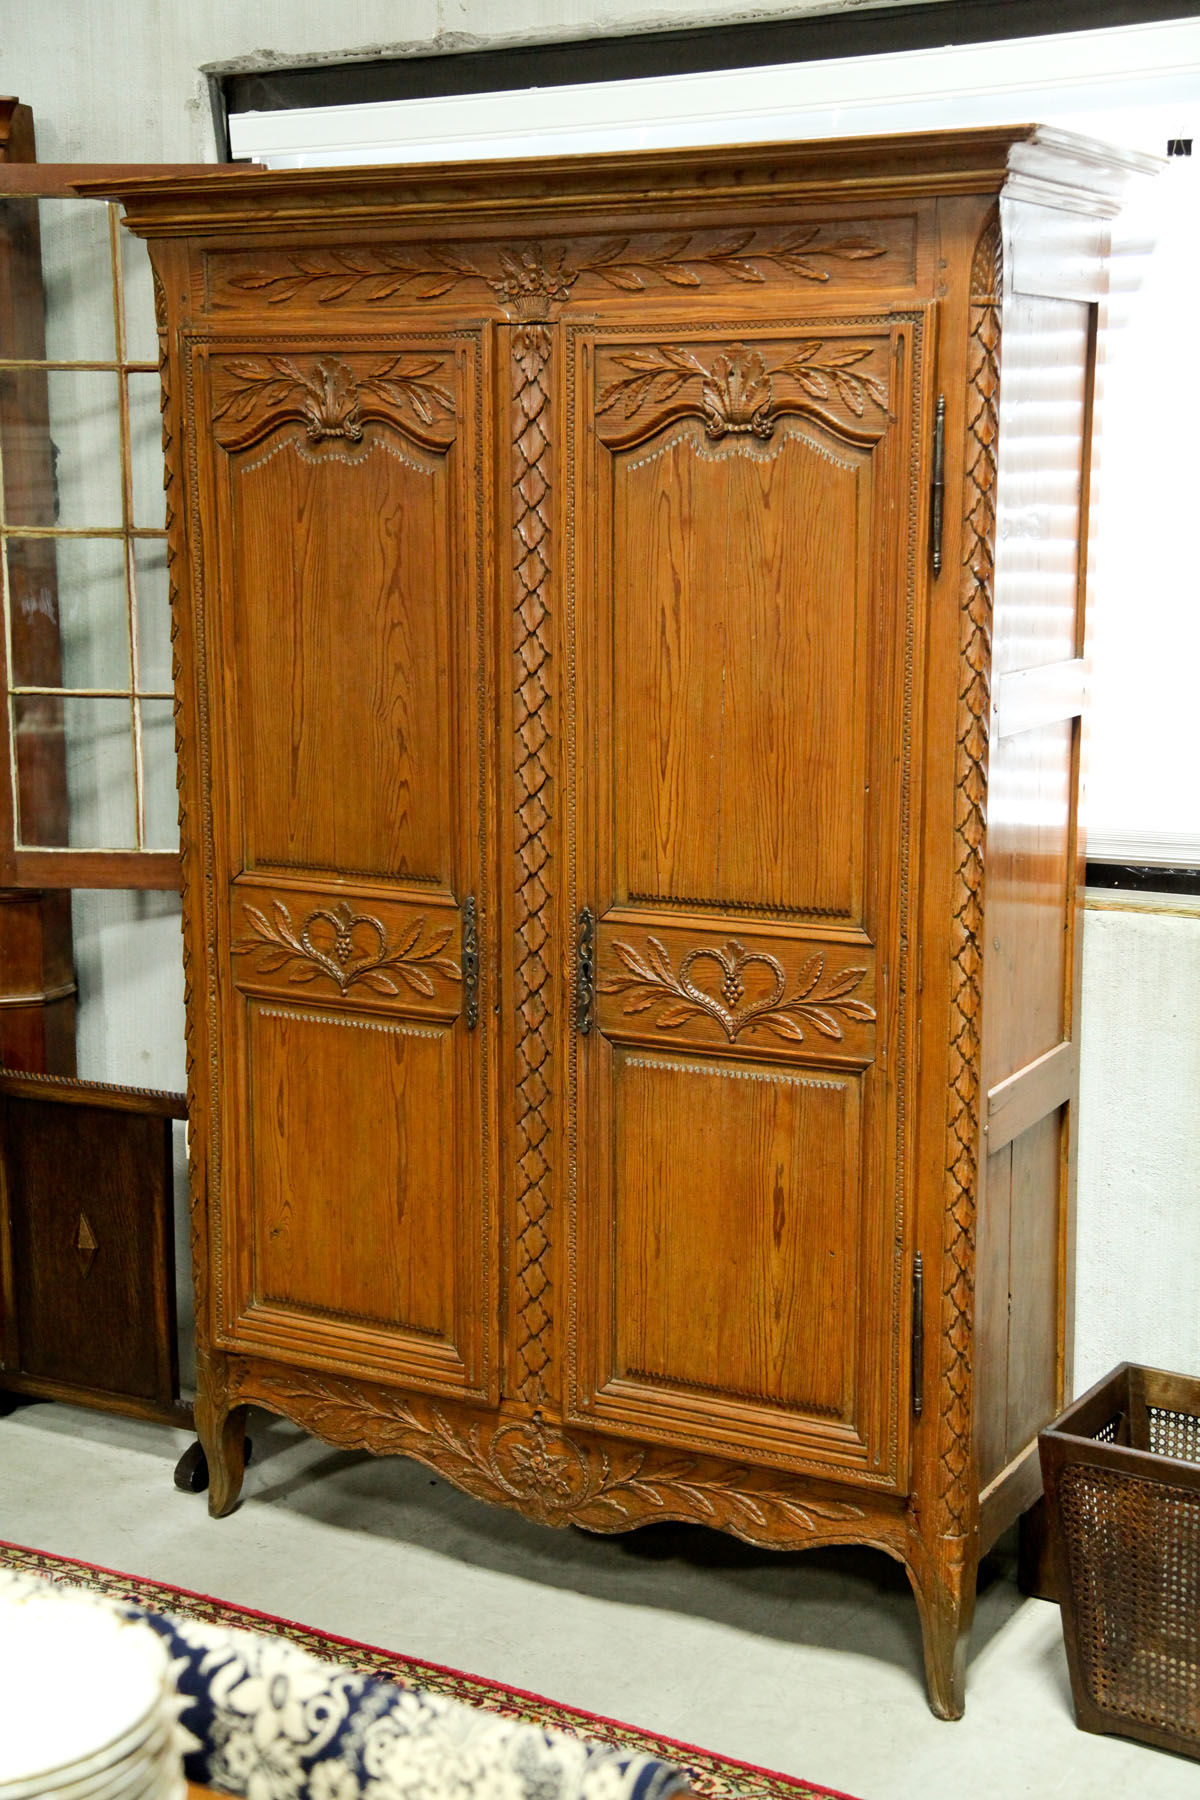 ARMOIRE.  France   early to mid